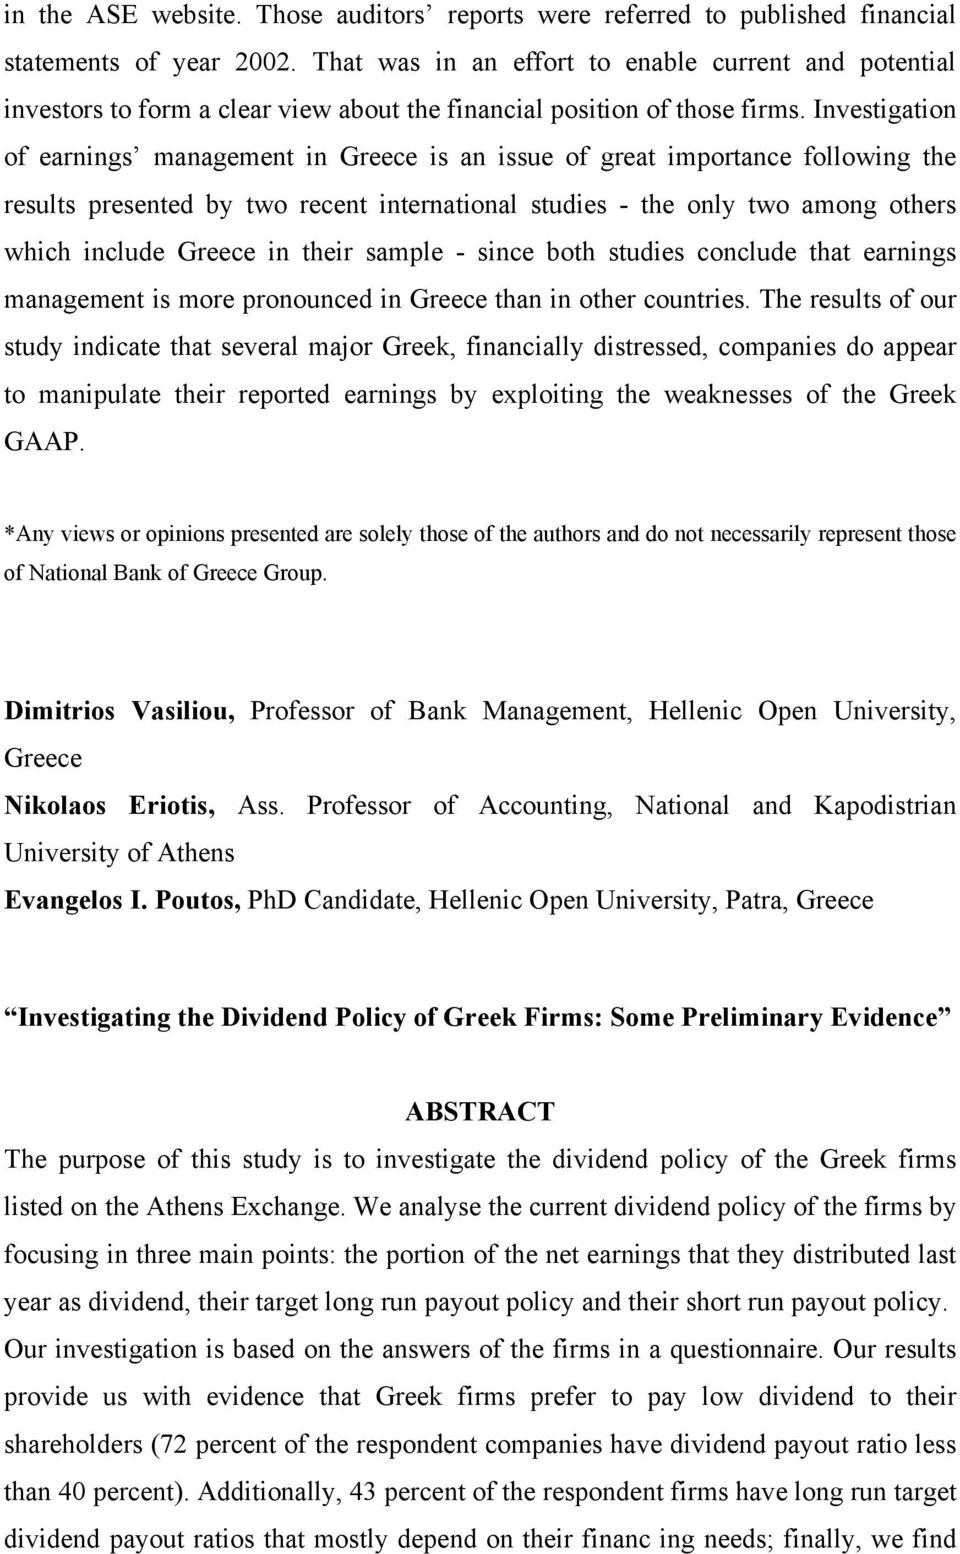 Investigation of earnings management in Greece is an issue of great importance following the results presented by two recent international studies - the only two among others which include Greece in